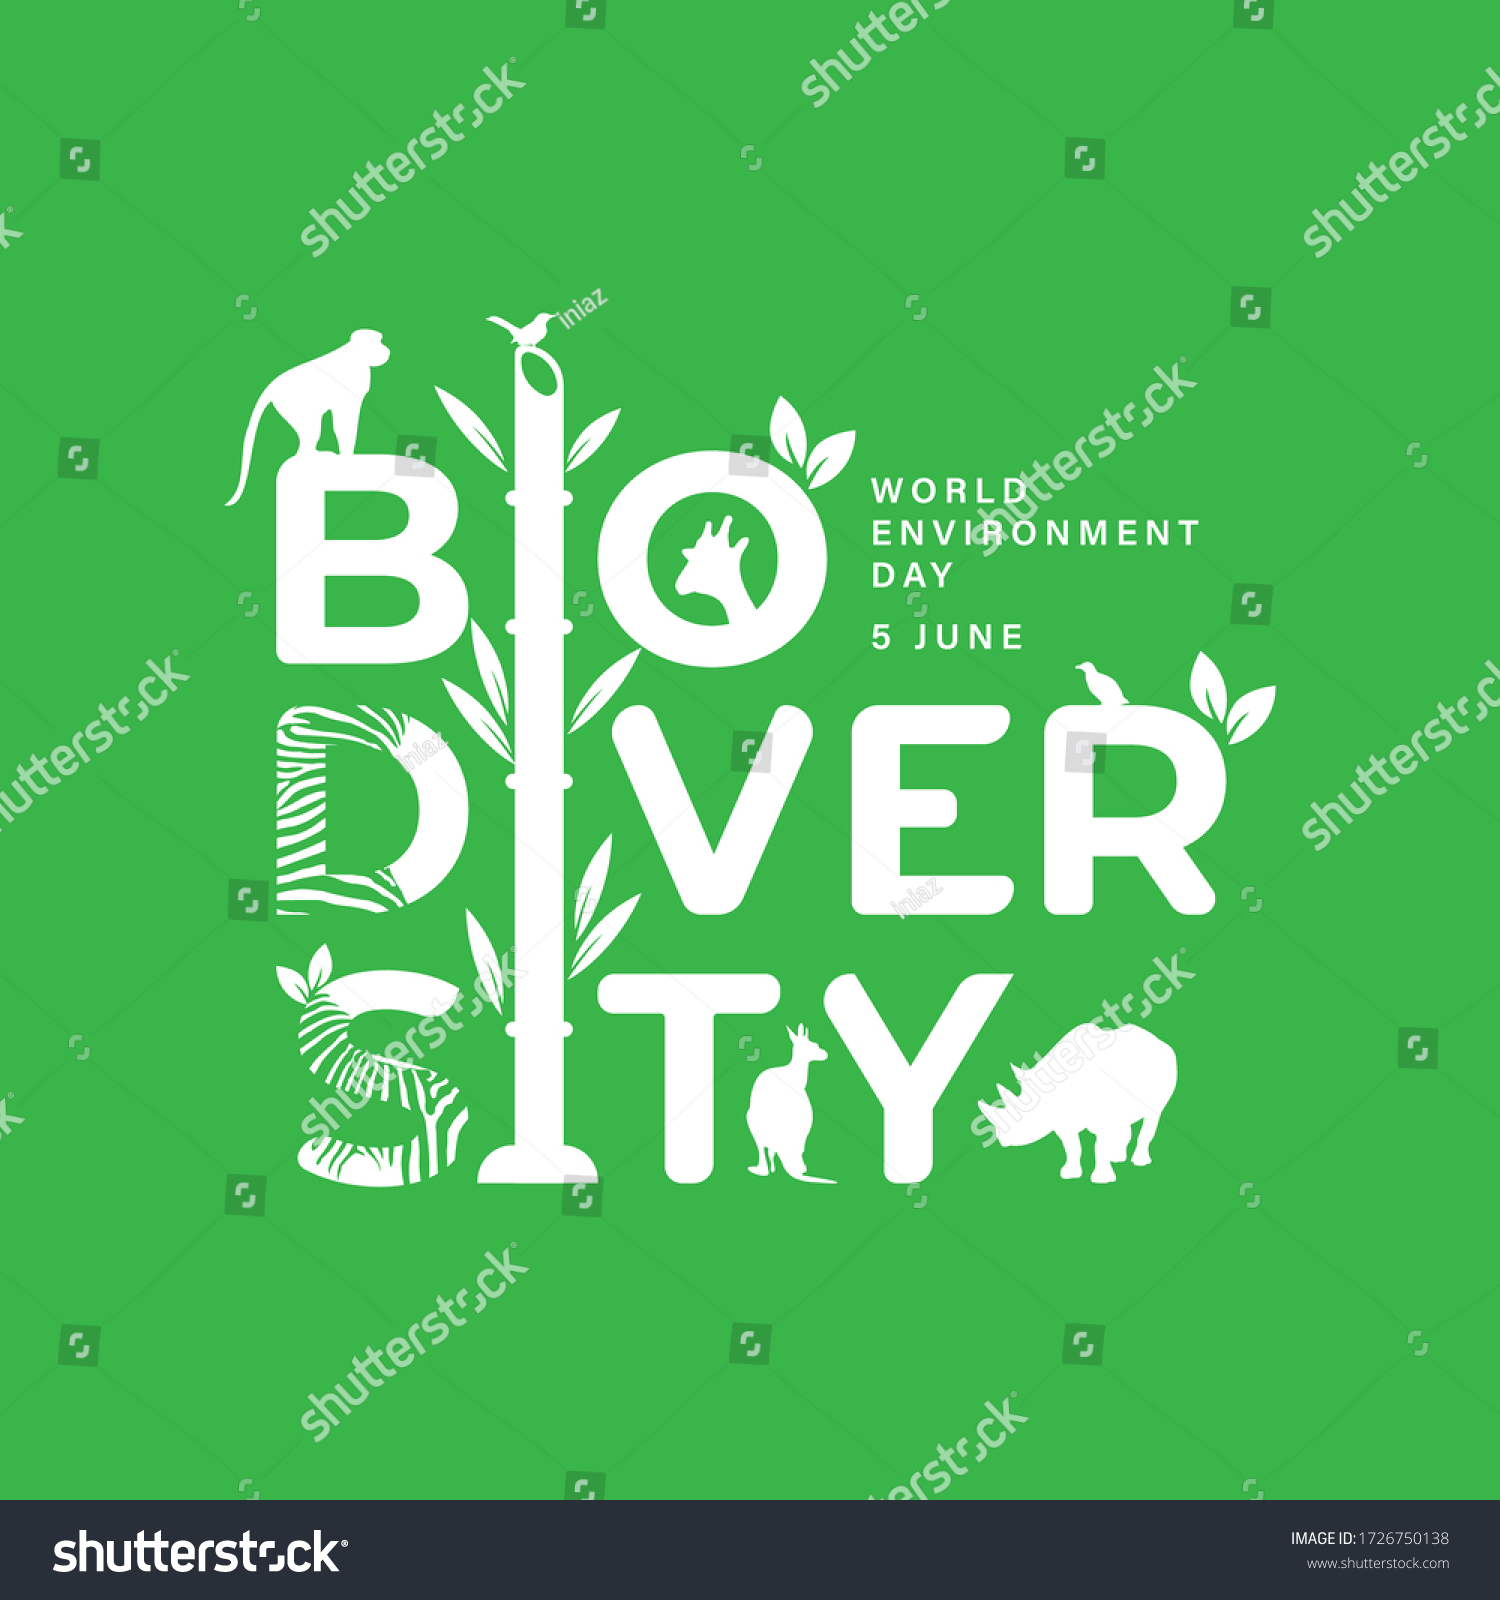 BIODIVERSITY typography design with green color for environment day event . june 5th #1726750138